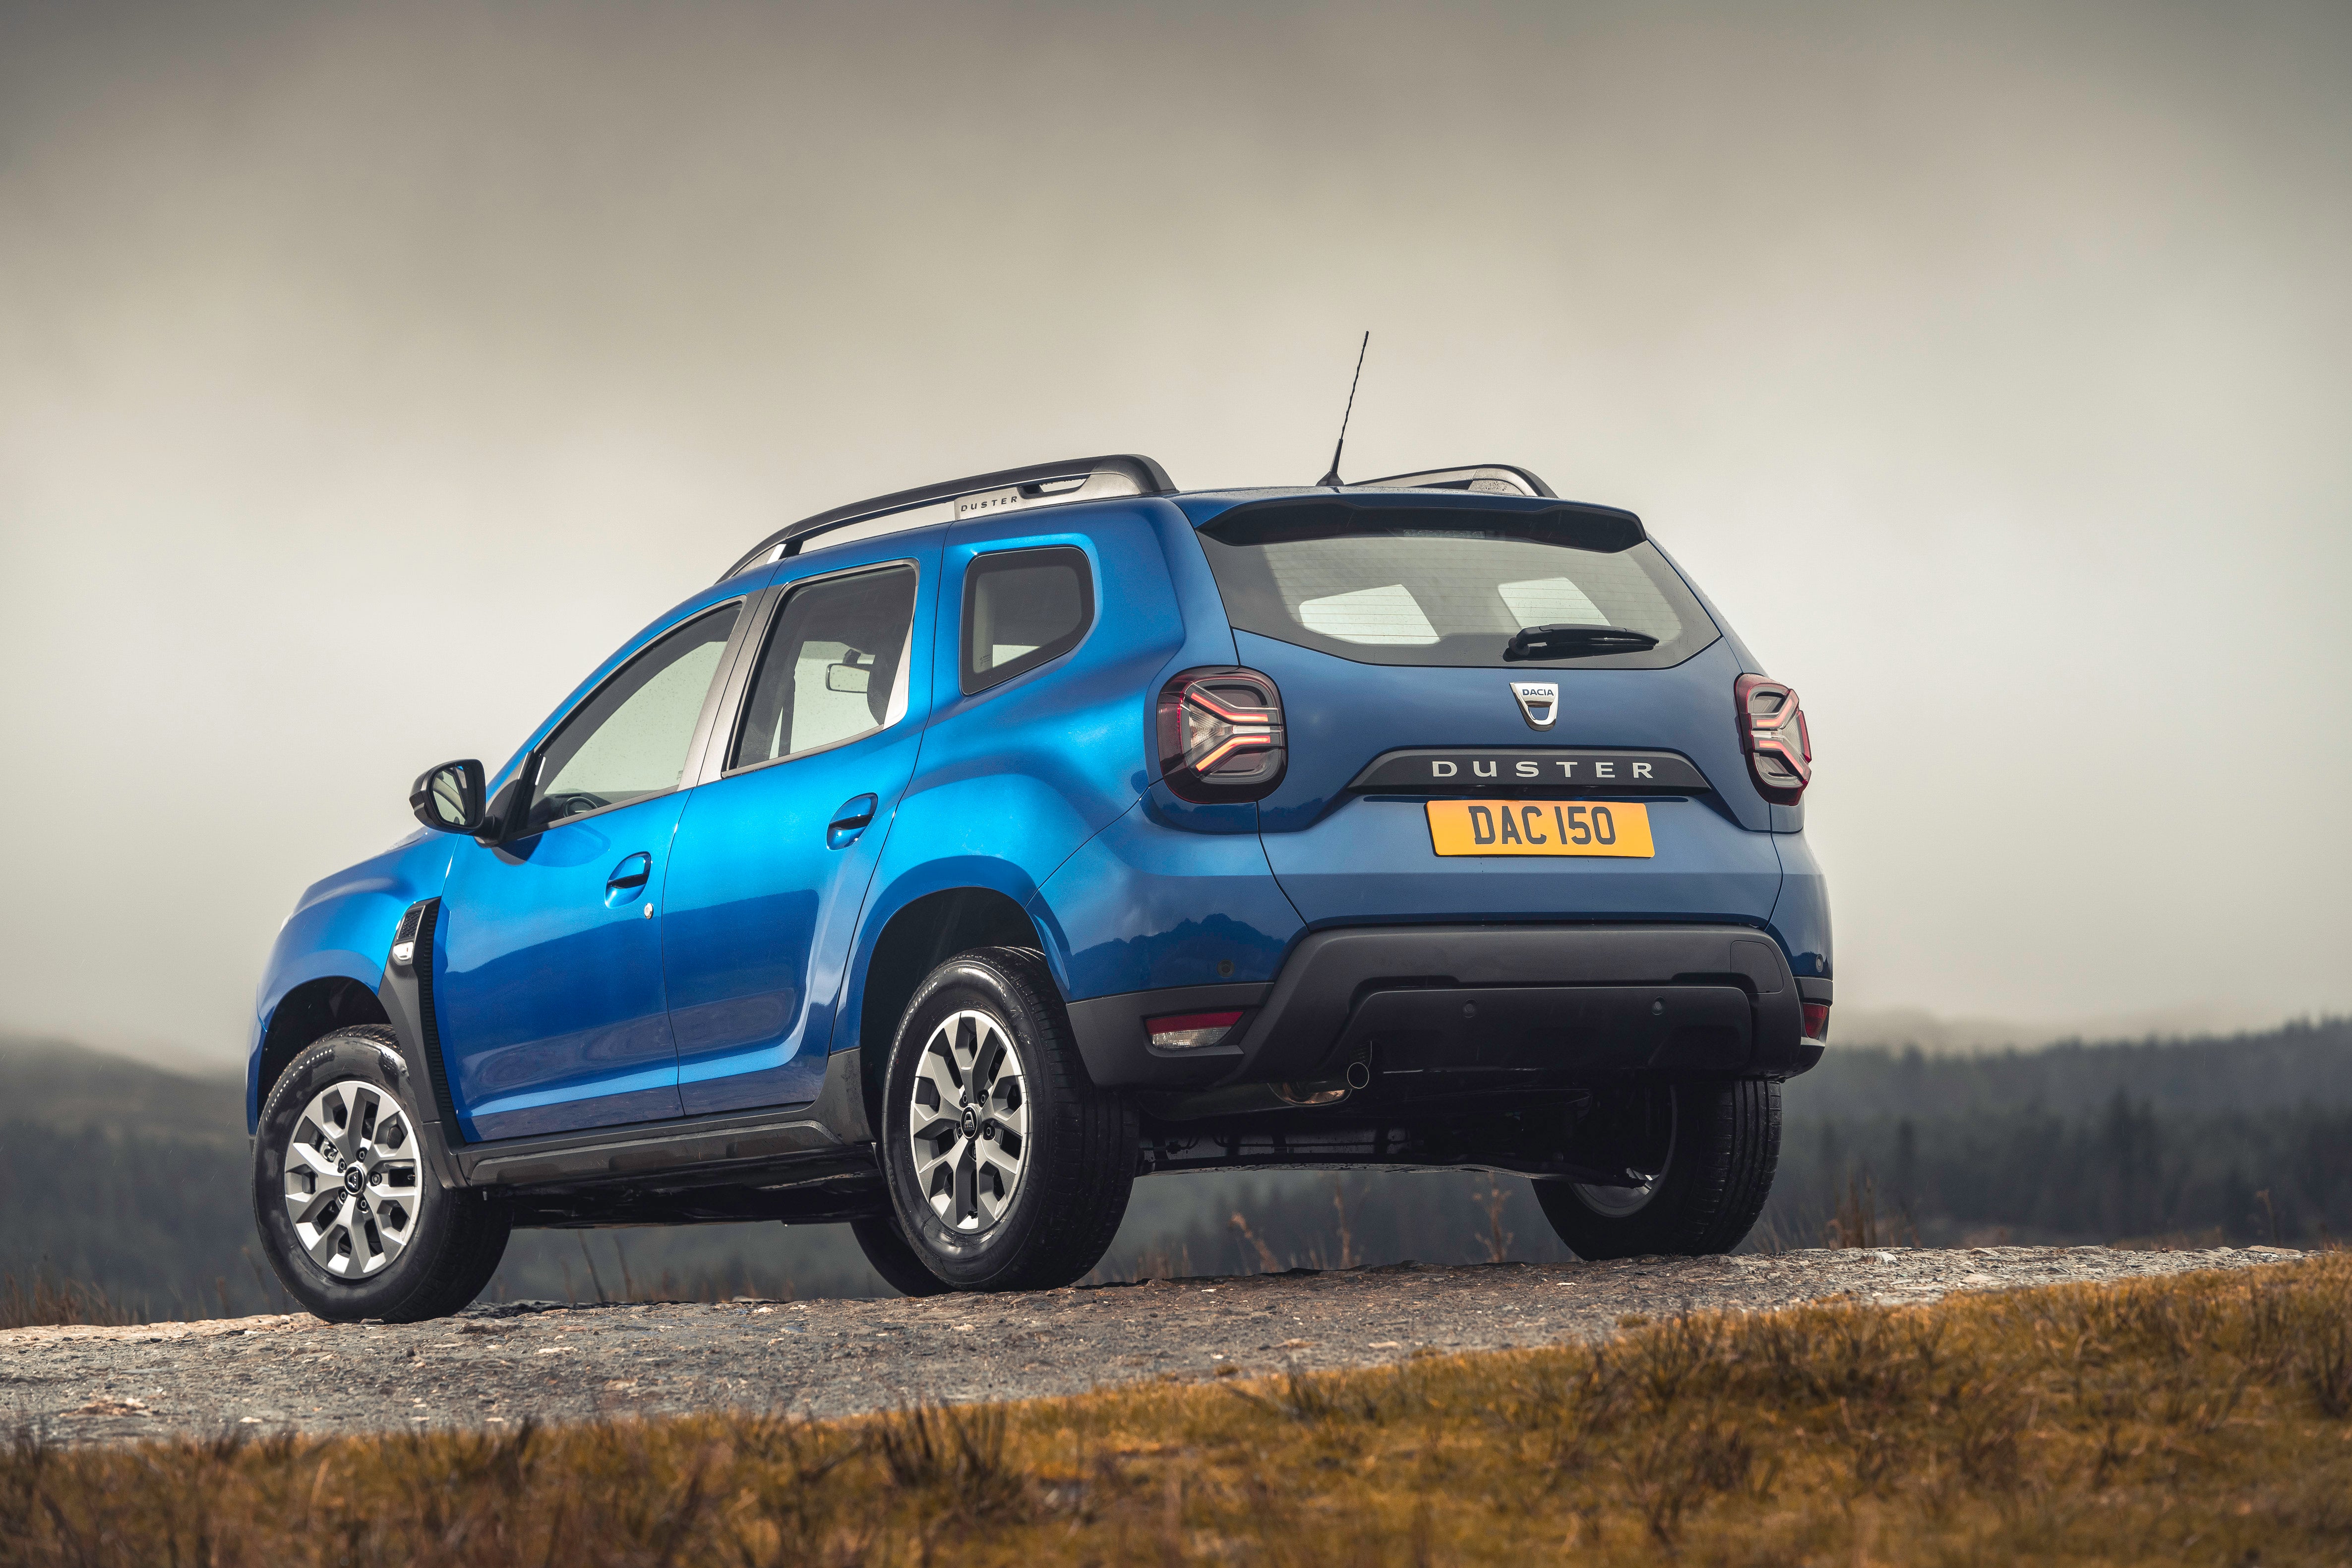 Fracción maorí Abastecer Dacia Duster review: A whole lot of car, for not much money | The  Independent